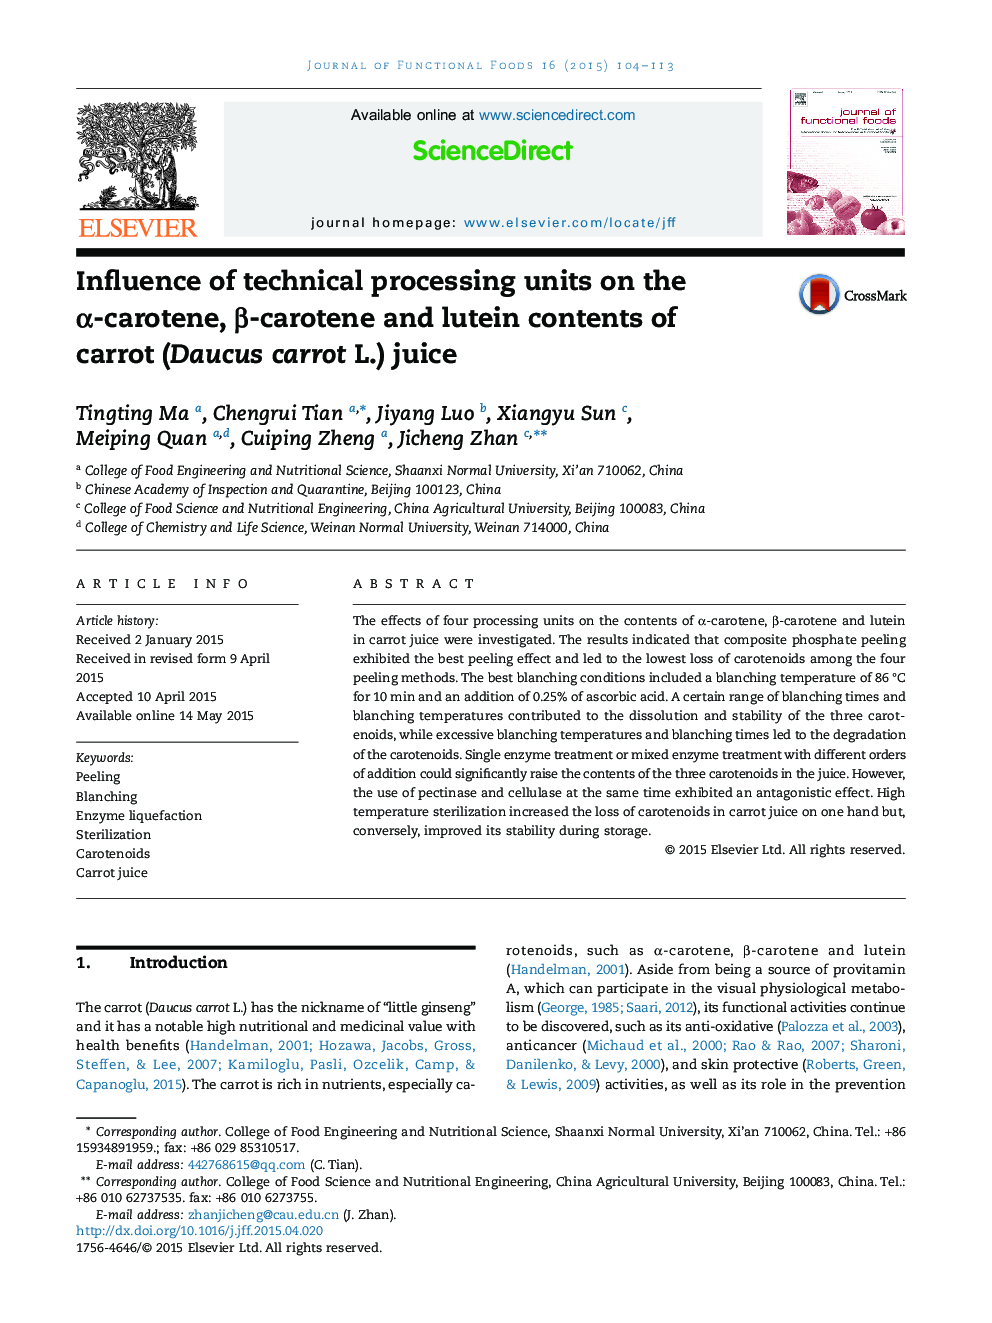 Influence of technical processing units on the α-carotene, β-carotene and lutein contents of carrot (Daucus carrot L.) juice